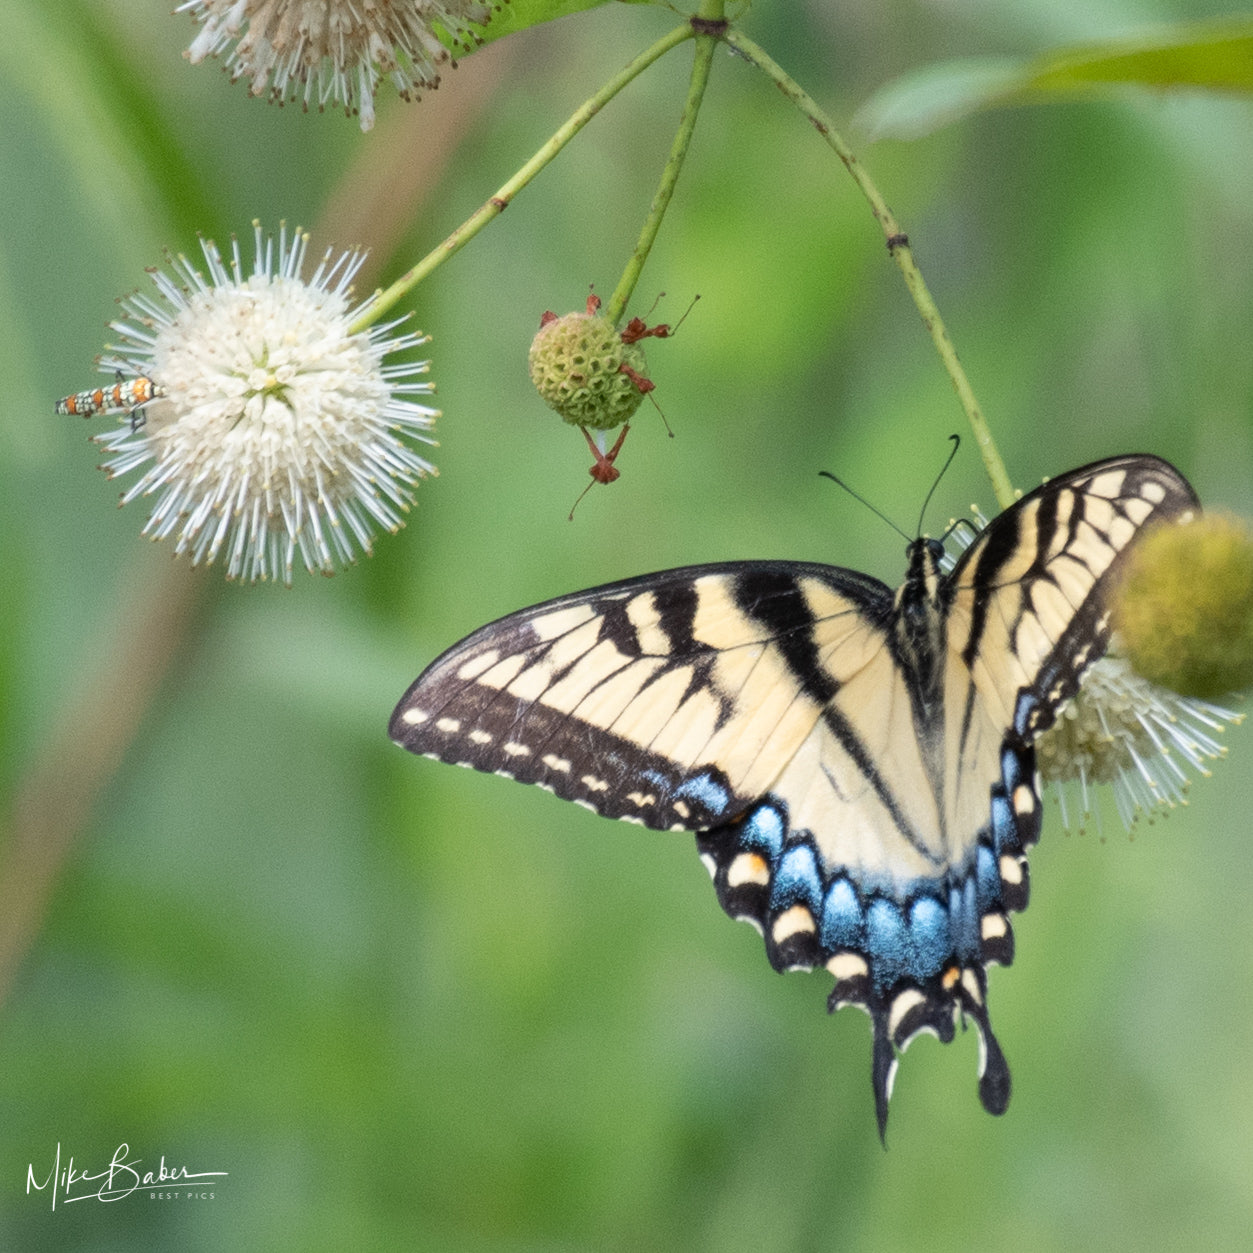 201 Butterfly with Friend PHOTOGRAPH by Mike Baber